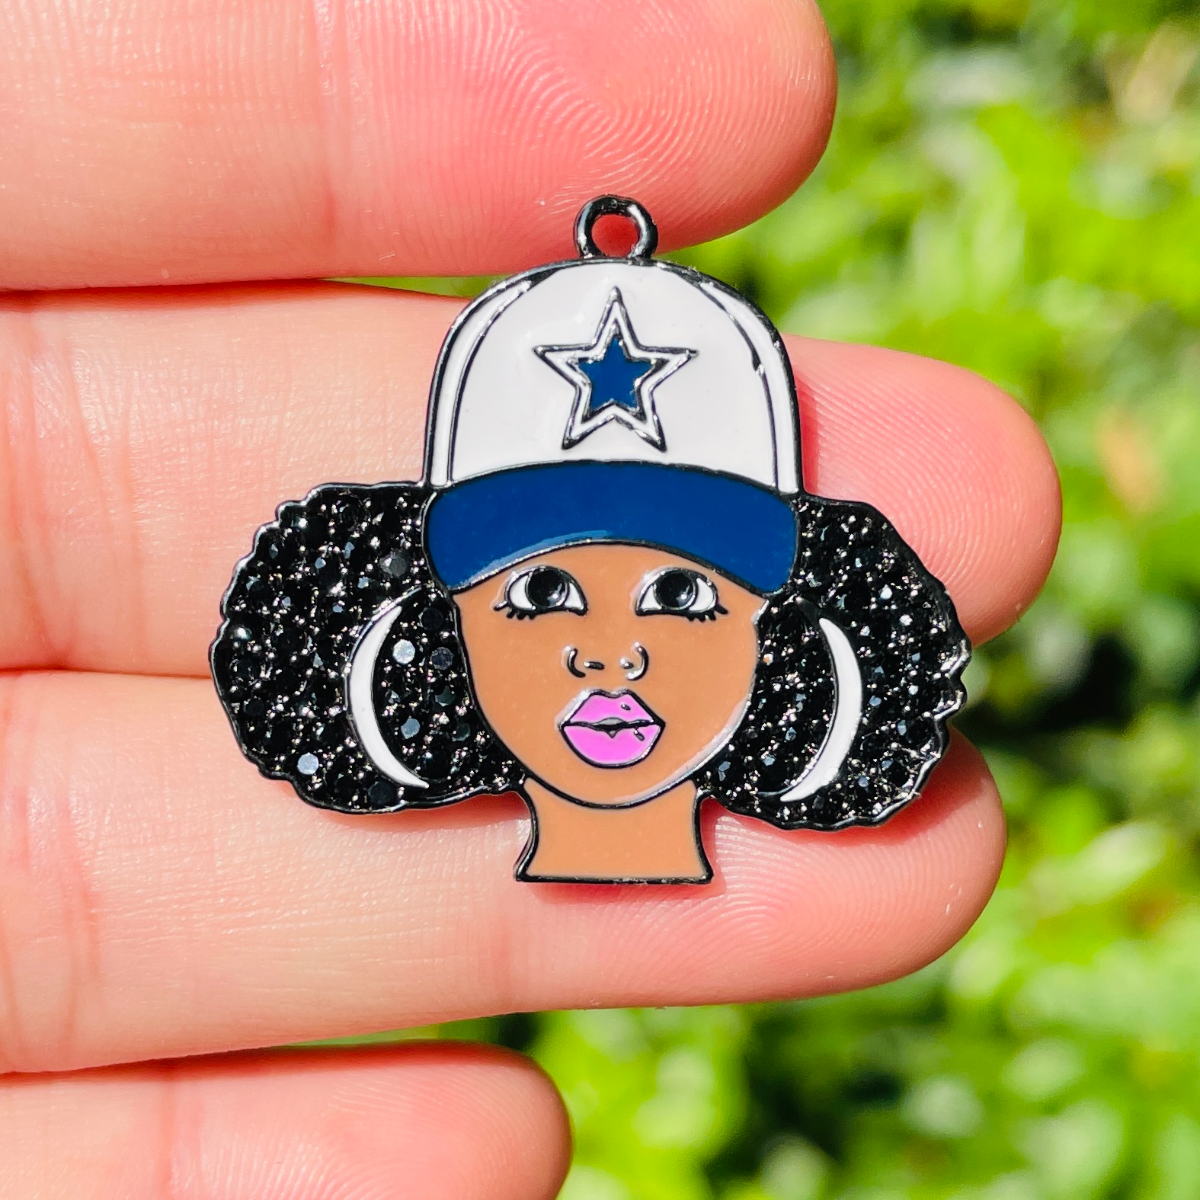 10pcs/lot 32.8*29.5mm CZ Paved Cowboys Black Girl Charms Black on Black CZ Paved Charms Afro Girl/Queen Charms American Football Sports New Charms Arrivals Charms Beads Beyond